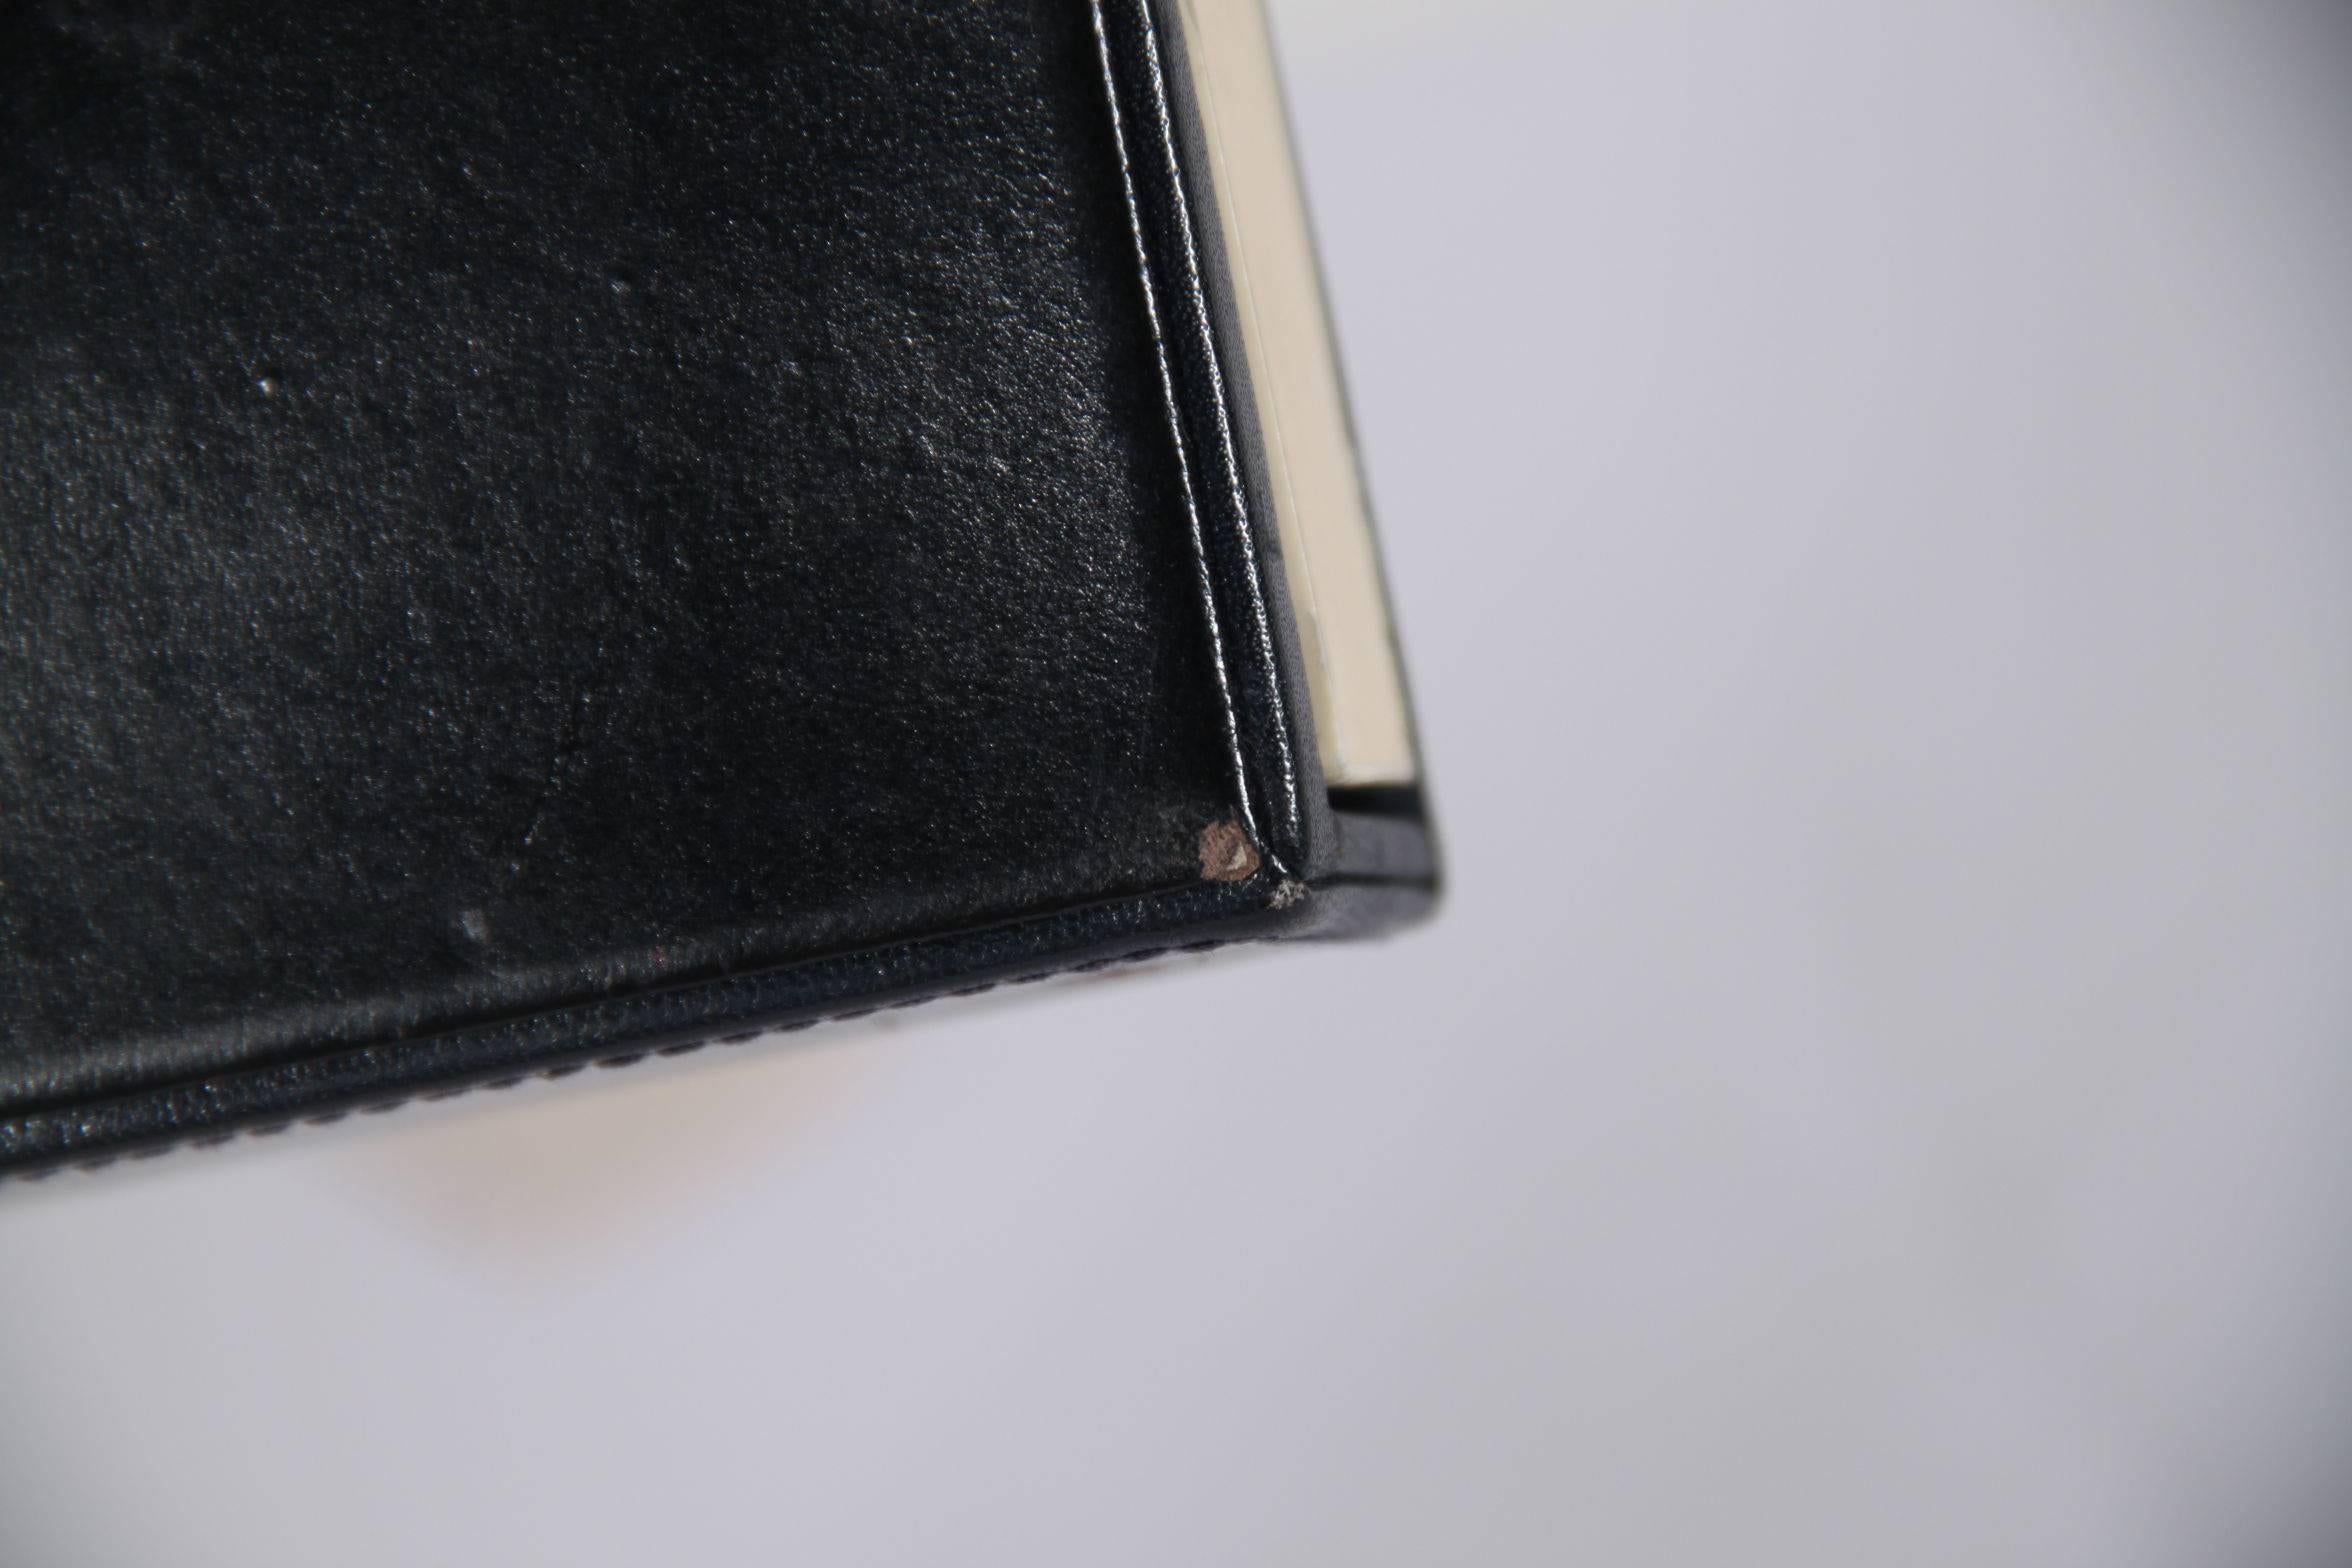  Brand: GUCCI - made in Italy

Logos / Tags: 'GUCCI Italy' crest embossed on the bottom of the notepad

Condition (please read our condition chart below): VERY GOOD CONDITION: An item is considered wearable but has some surface flaws (staining,